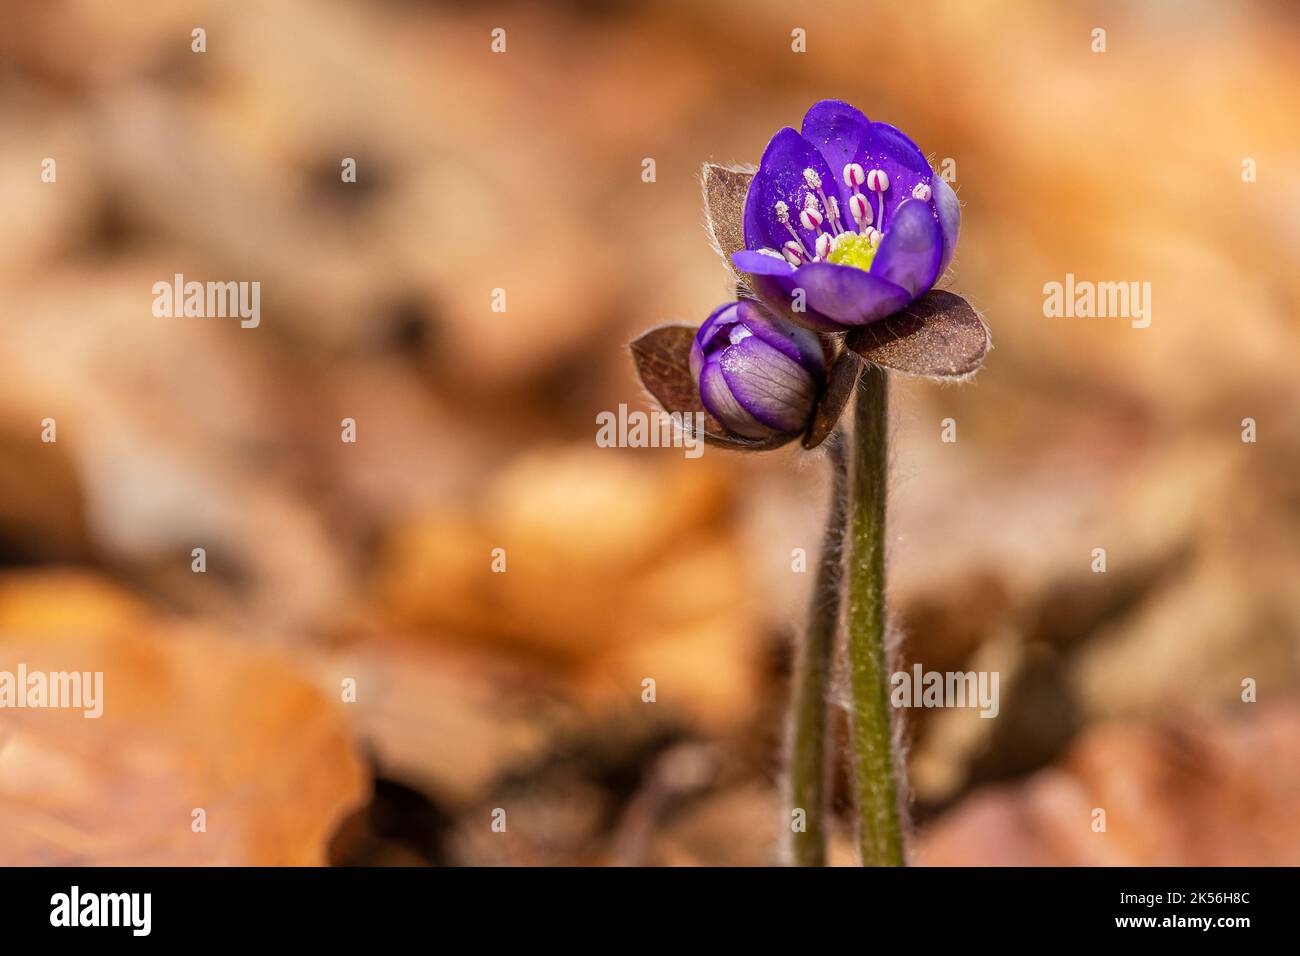 Close up image of the common hepatica, fresh blue flowers growing in the woodland on a springtime. Dry orange and brown leaves in the background. Stock Photo